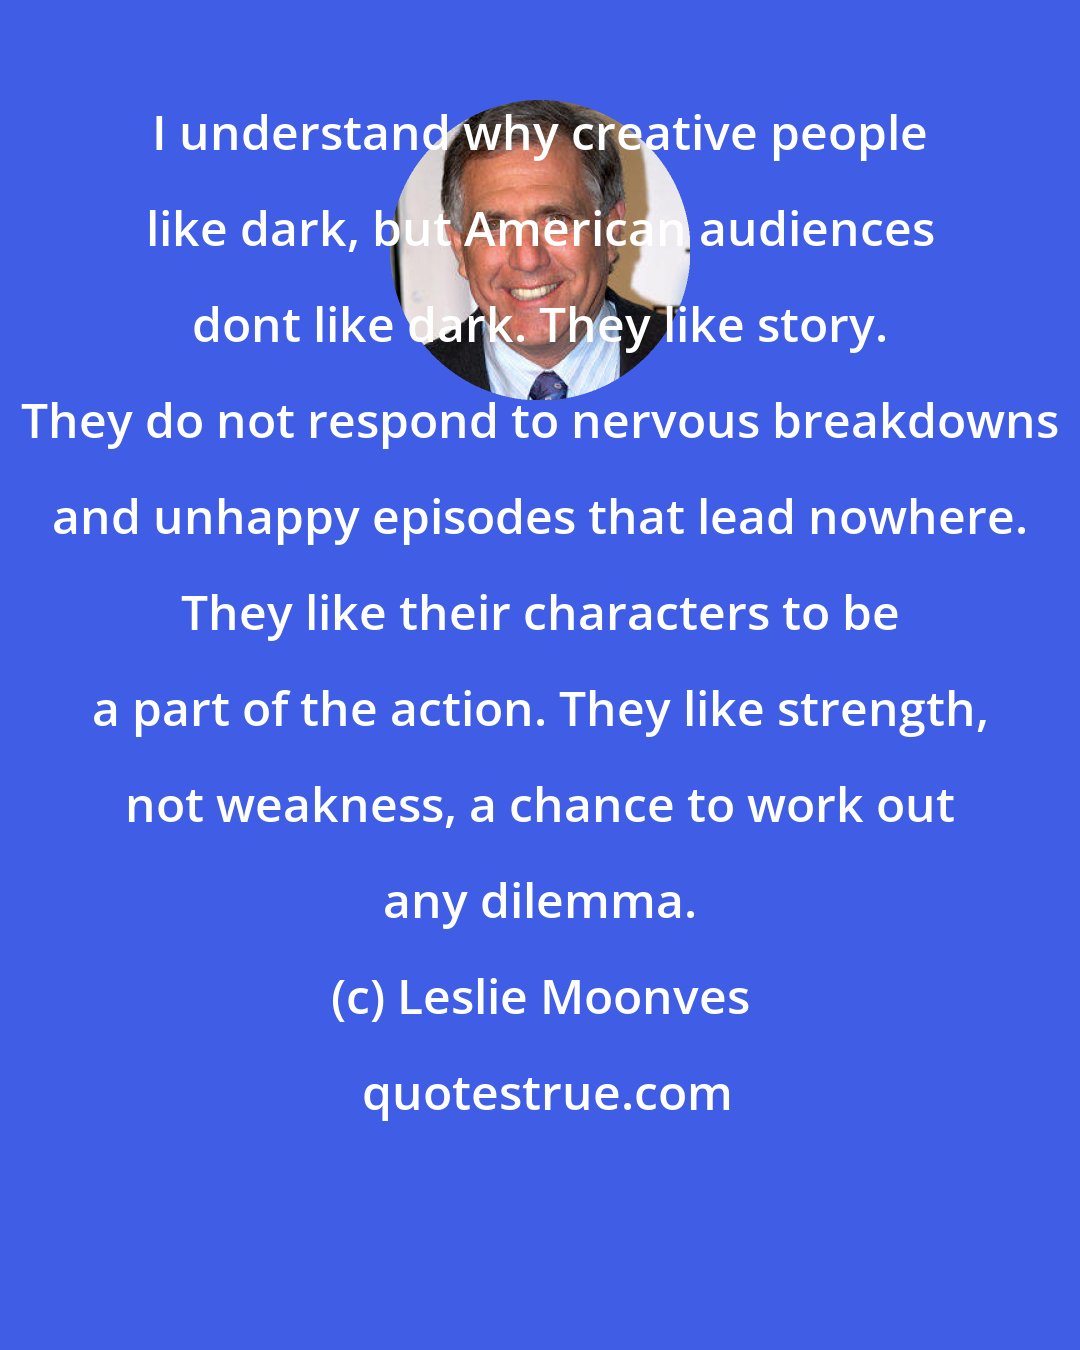 Leslie Moonves: I understand why creative people like dark, but American audiences dont like dark. They like story. They do not respond to nervous breakdowns and unhappy episodes that lead nowhere. They like their characters to be a part of the action. They like strength, not weakness, a chance to work out any dilemma.